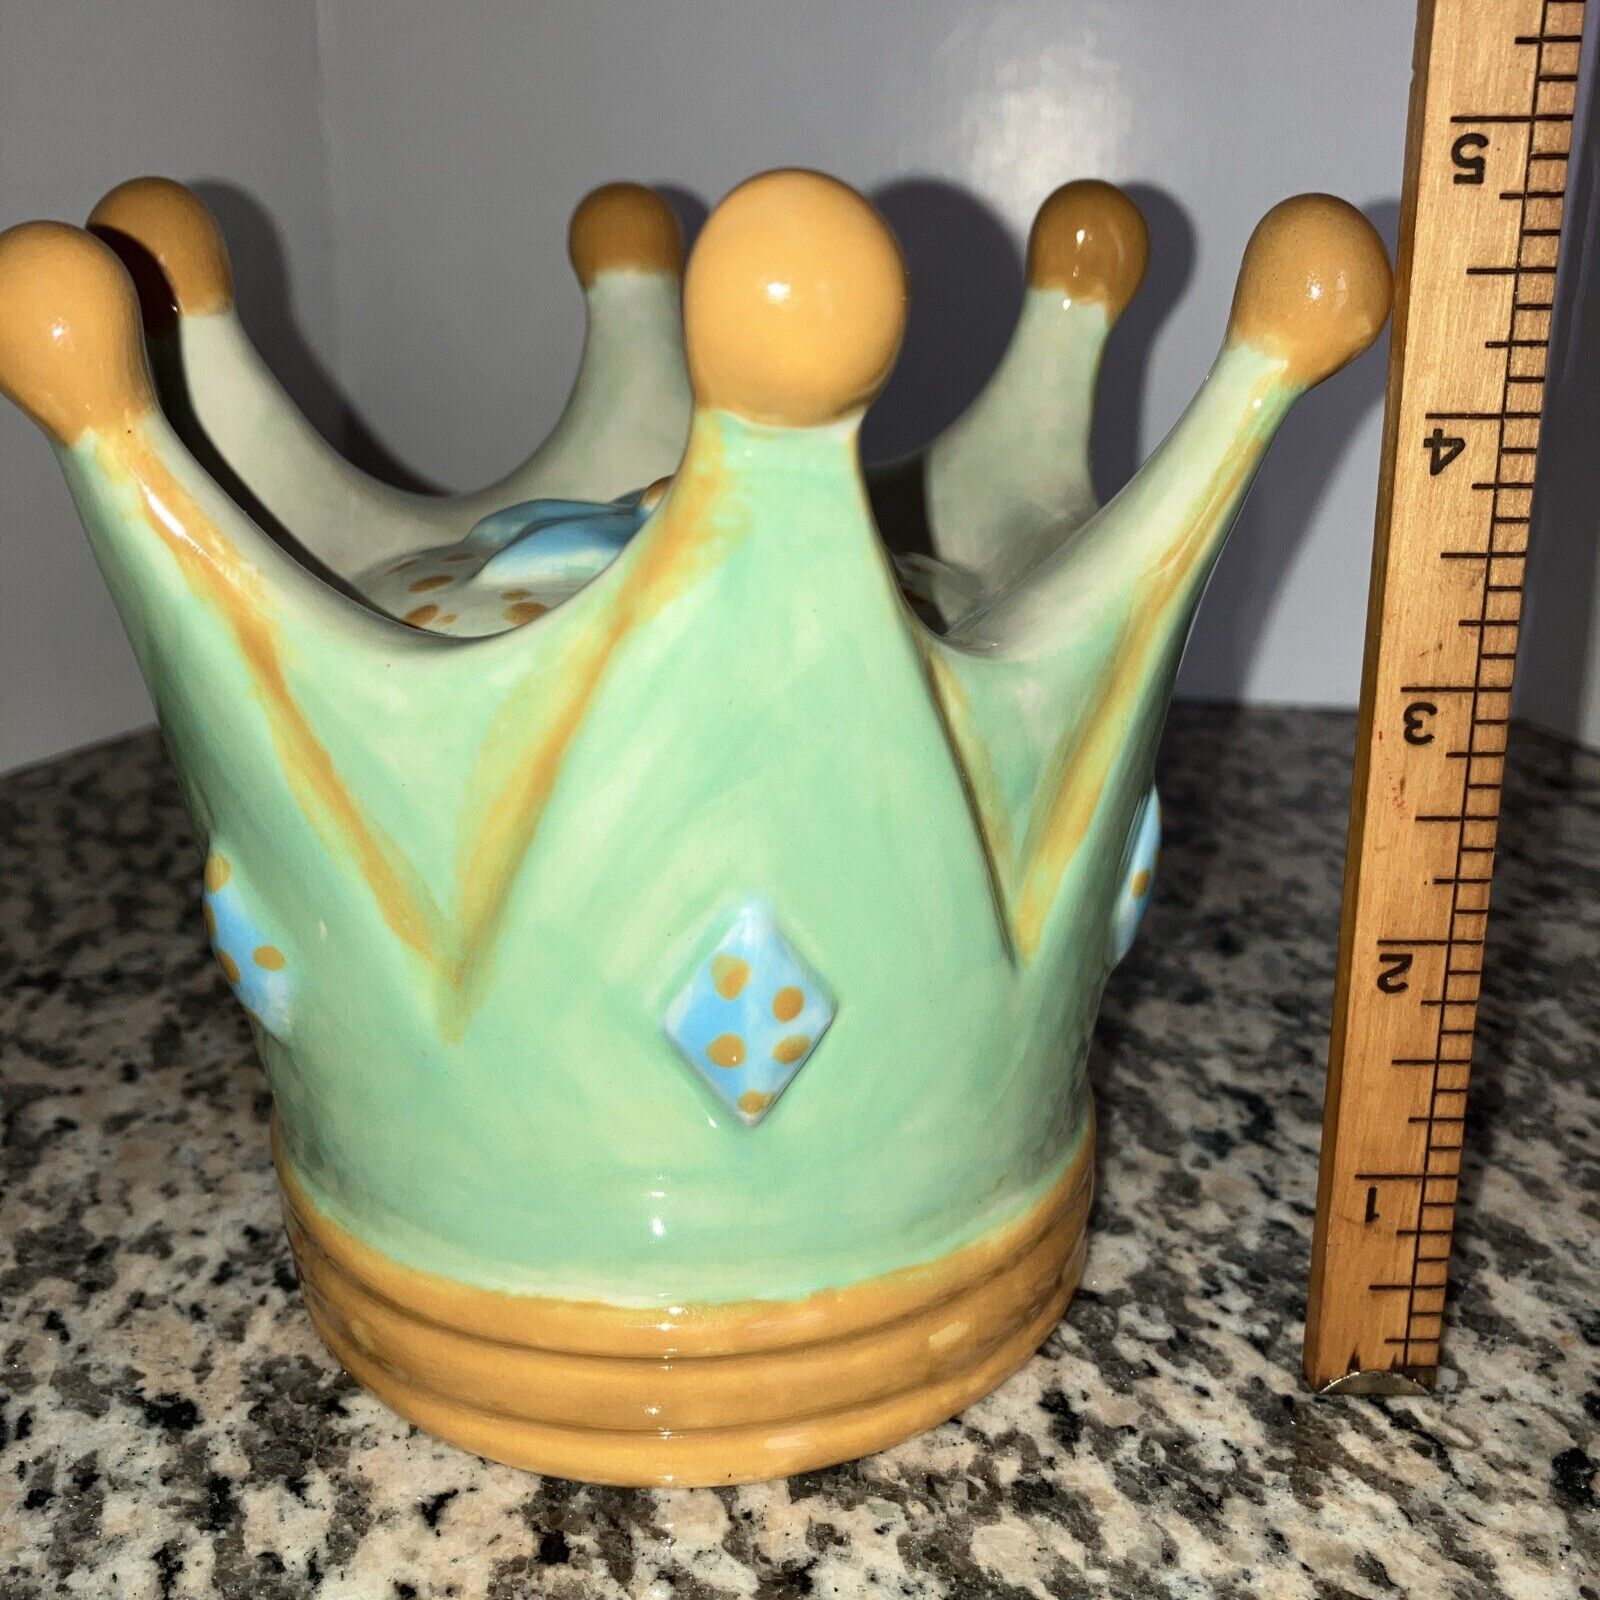 Ceramic King Or Prince CROWN Coin Piggy Bank One of a Kind Без бренда - фотография #7